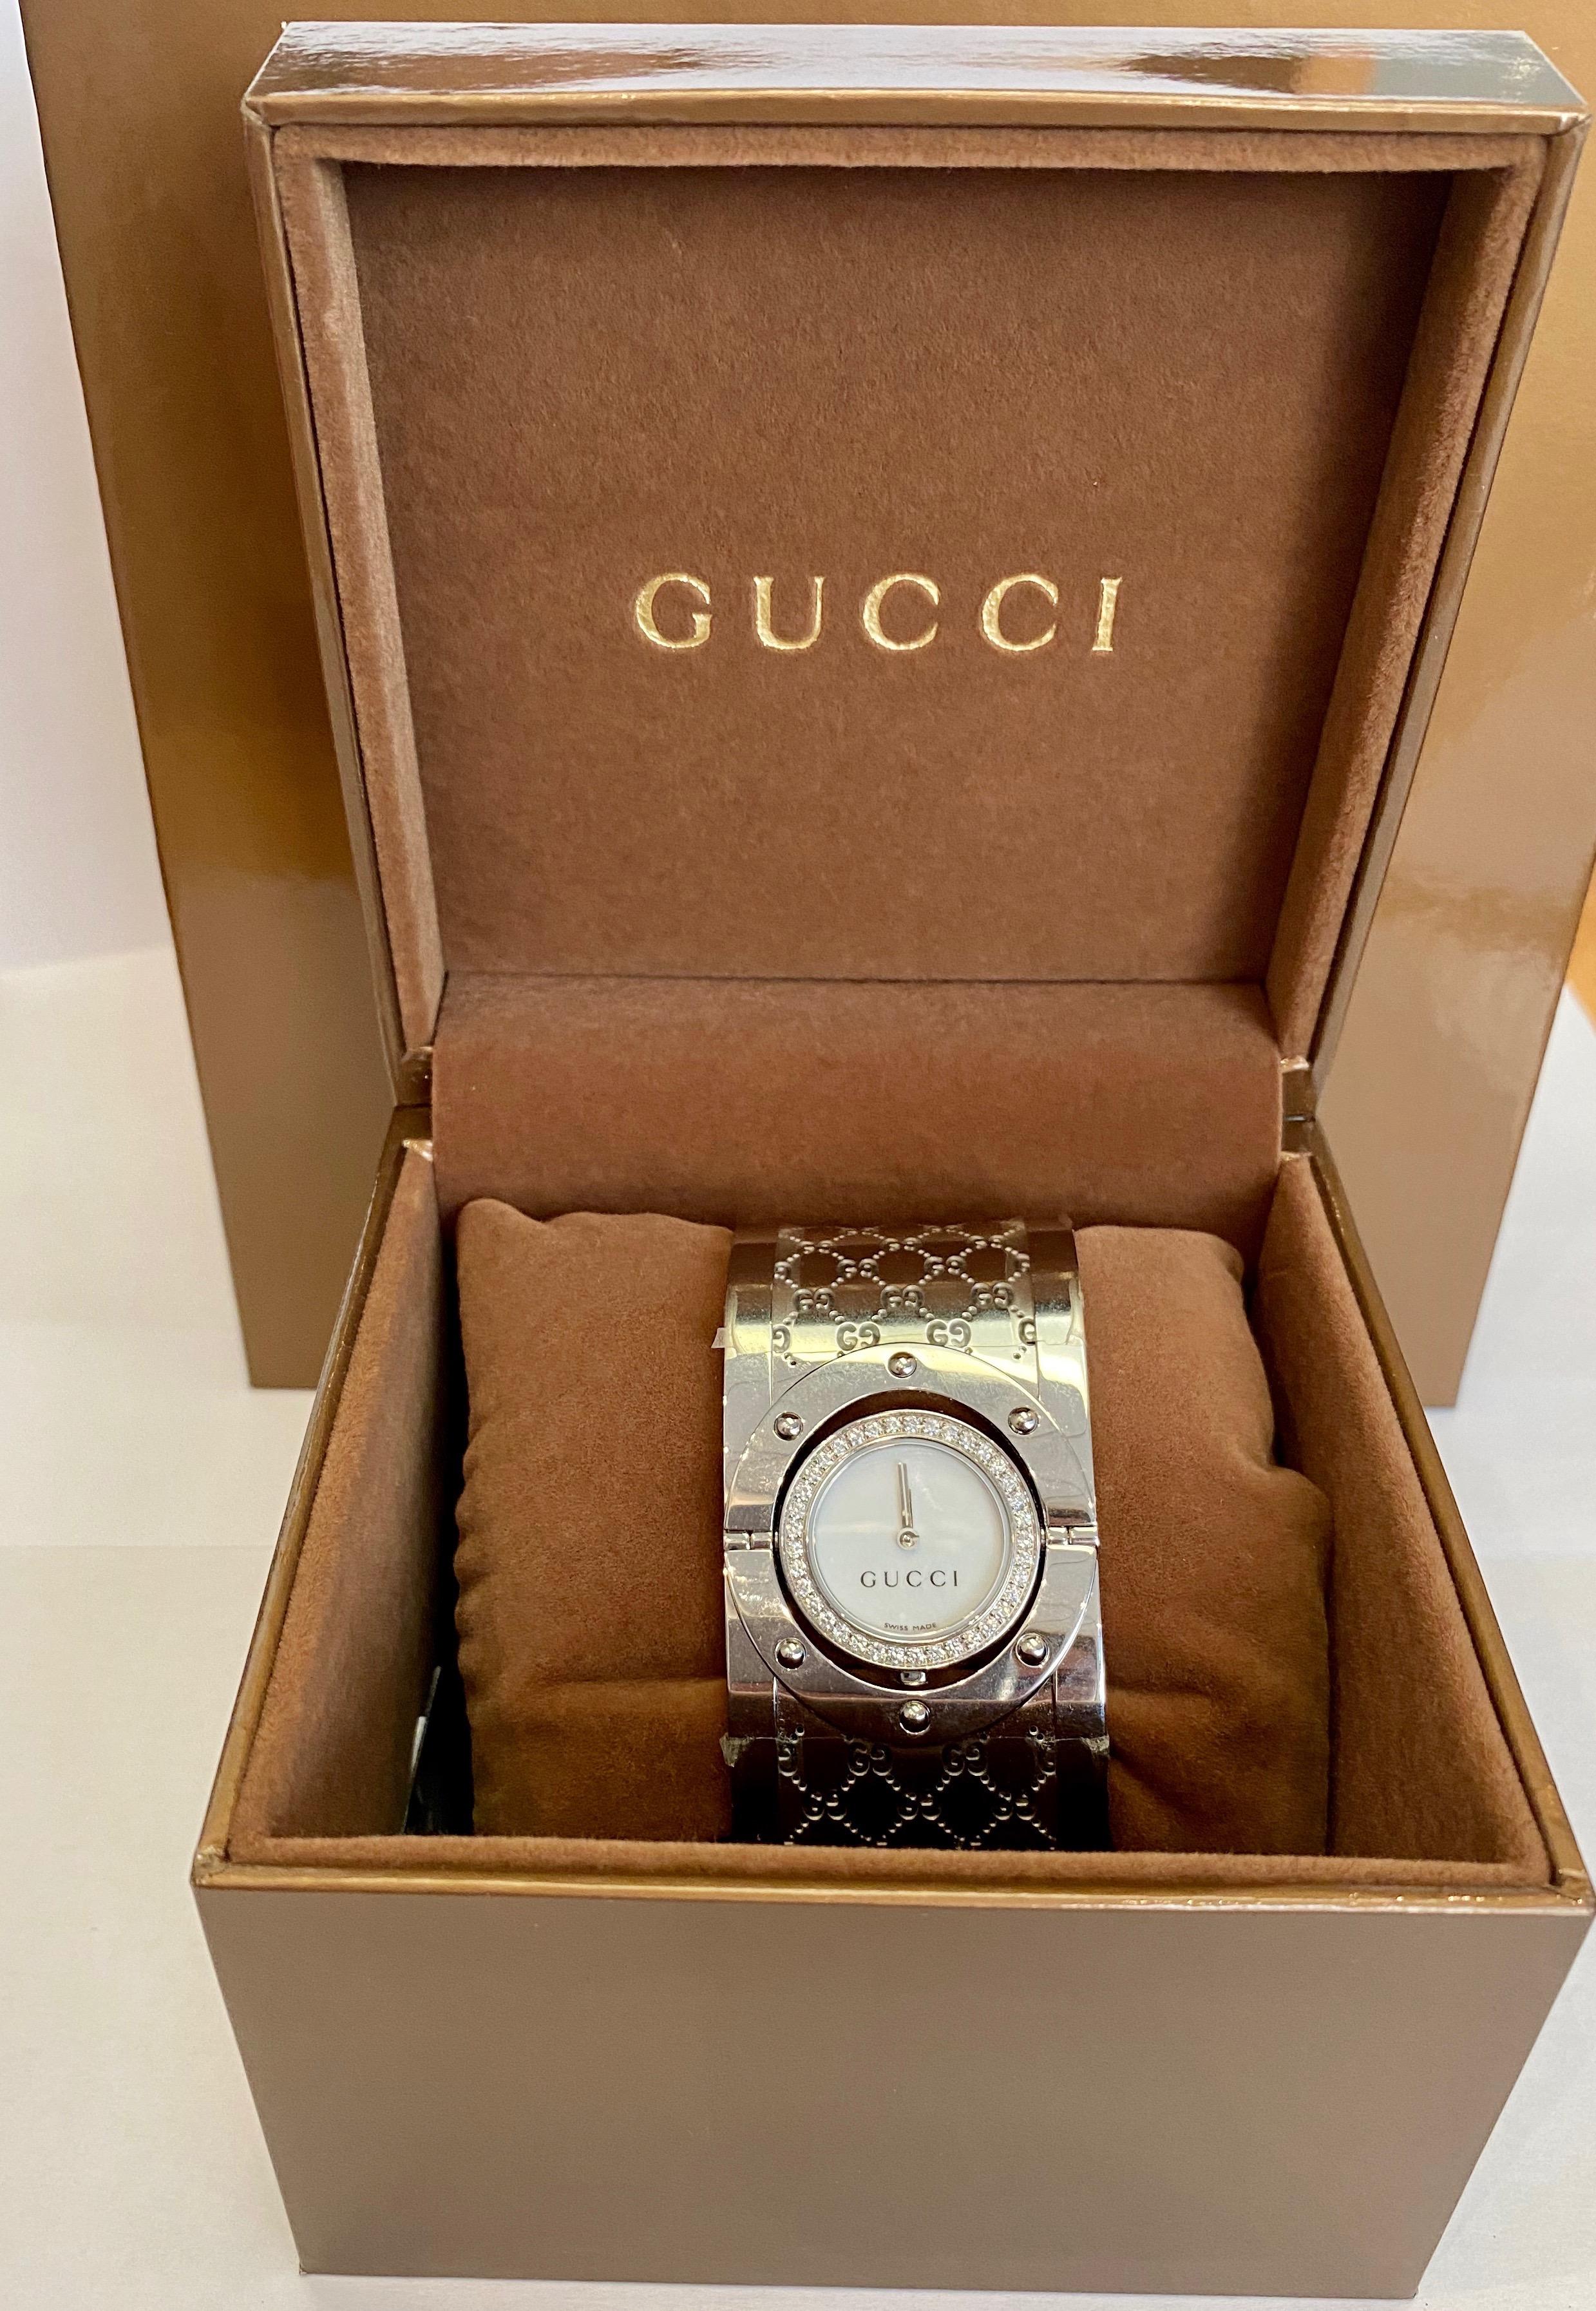 New with tags GUCCI Women's YA112416 Twirl Watch with White Dial and diamond bezel, diamonds weighting in total 2.60 carats:

Quartz movement
Scratch resistant sapphire crystal
Case diameter:23 mm
Stainless steel case
Women's Band width: 33